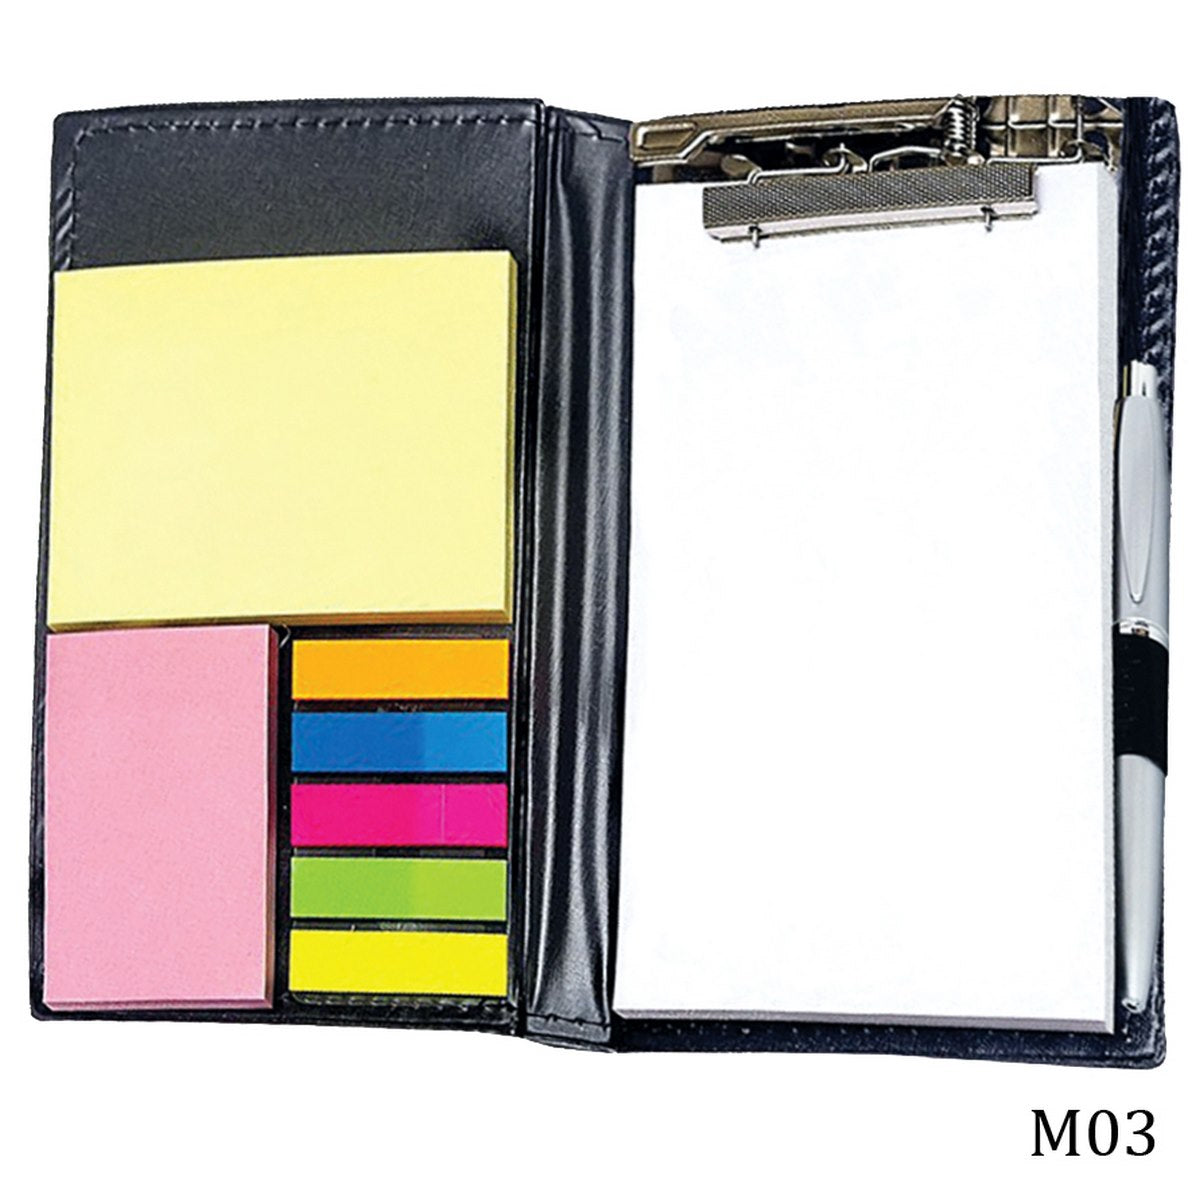 Sticky Note Pad - For Office Use, Personal Use, or Corporate Gifting JAM03